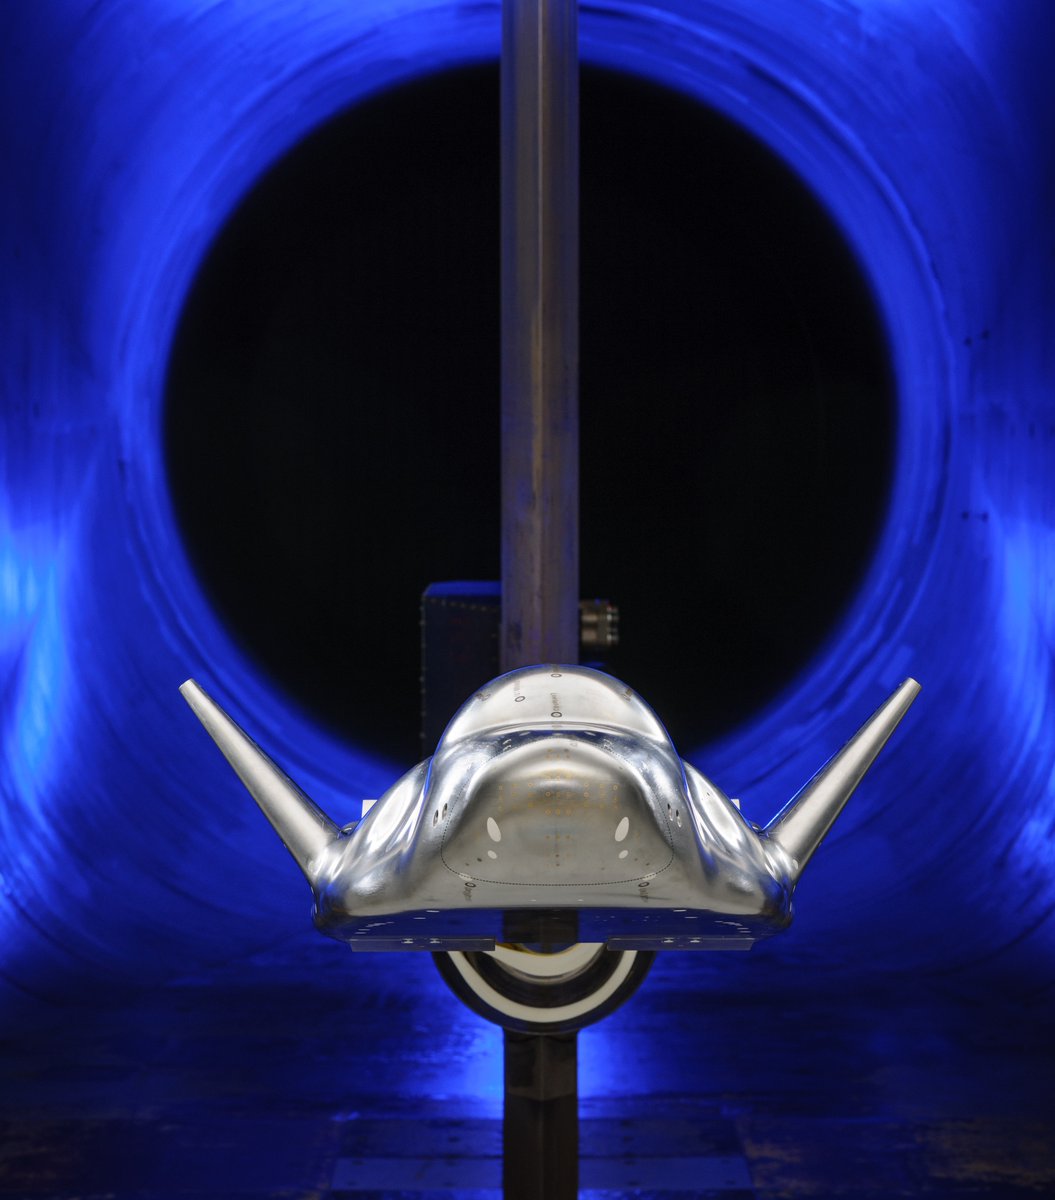 Dream Chaser 💫 A scale model of the Dream Chaser spaceplane was tested in our wind tunnels in 2020, and now the real thing is gearing up for first flight to the @Space_Station. Learn more: go.nasa.gov/3QWPfPs